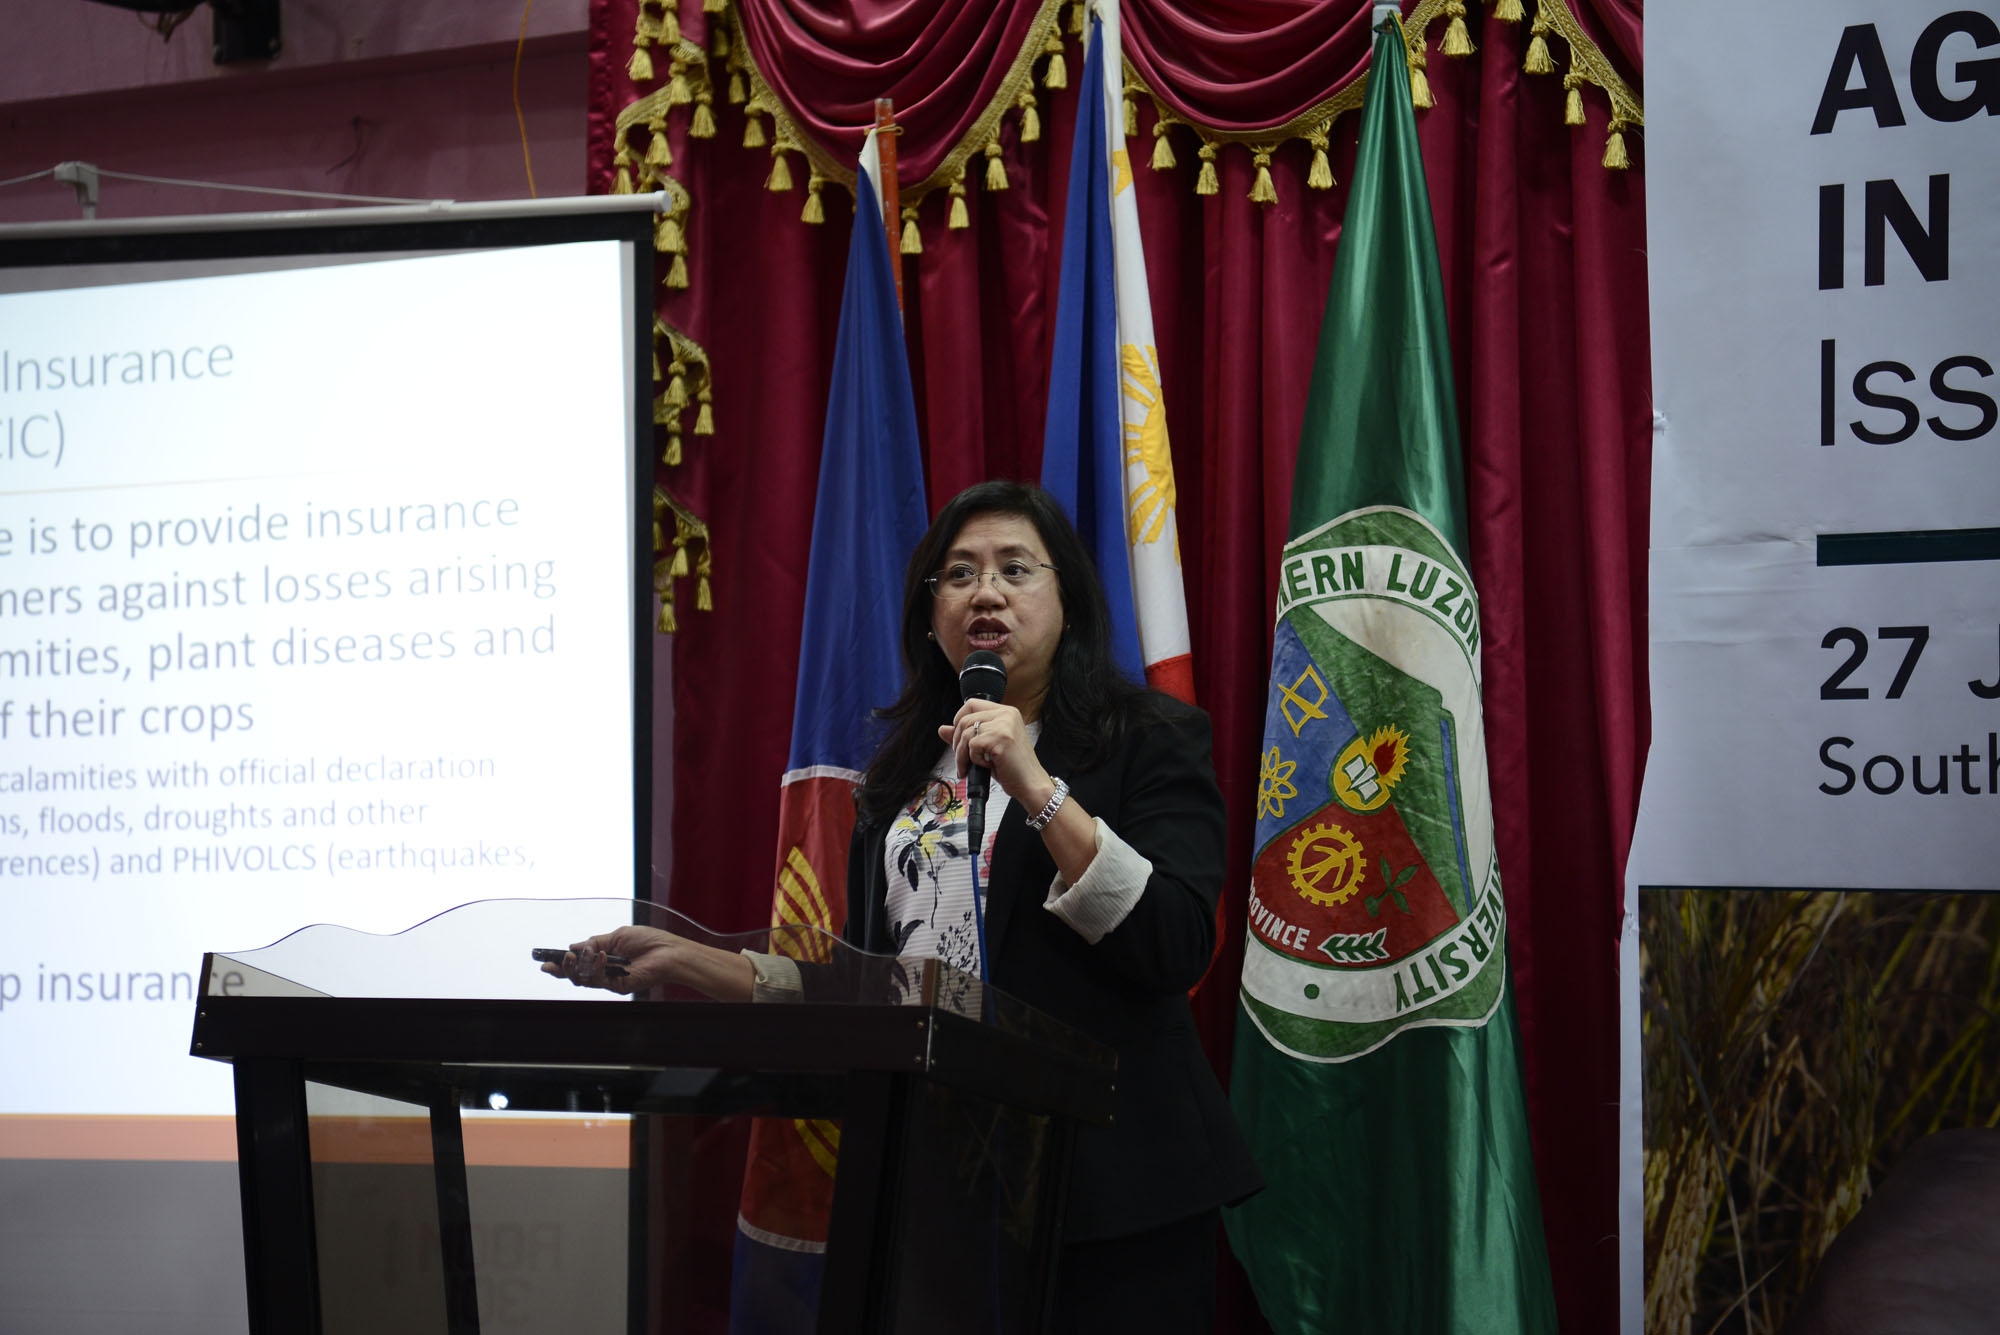 Regional forum on Agricultural Development in Southern Tagalog: Issues and Opportunities-agri-slsu-15-20180627.jpg